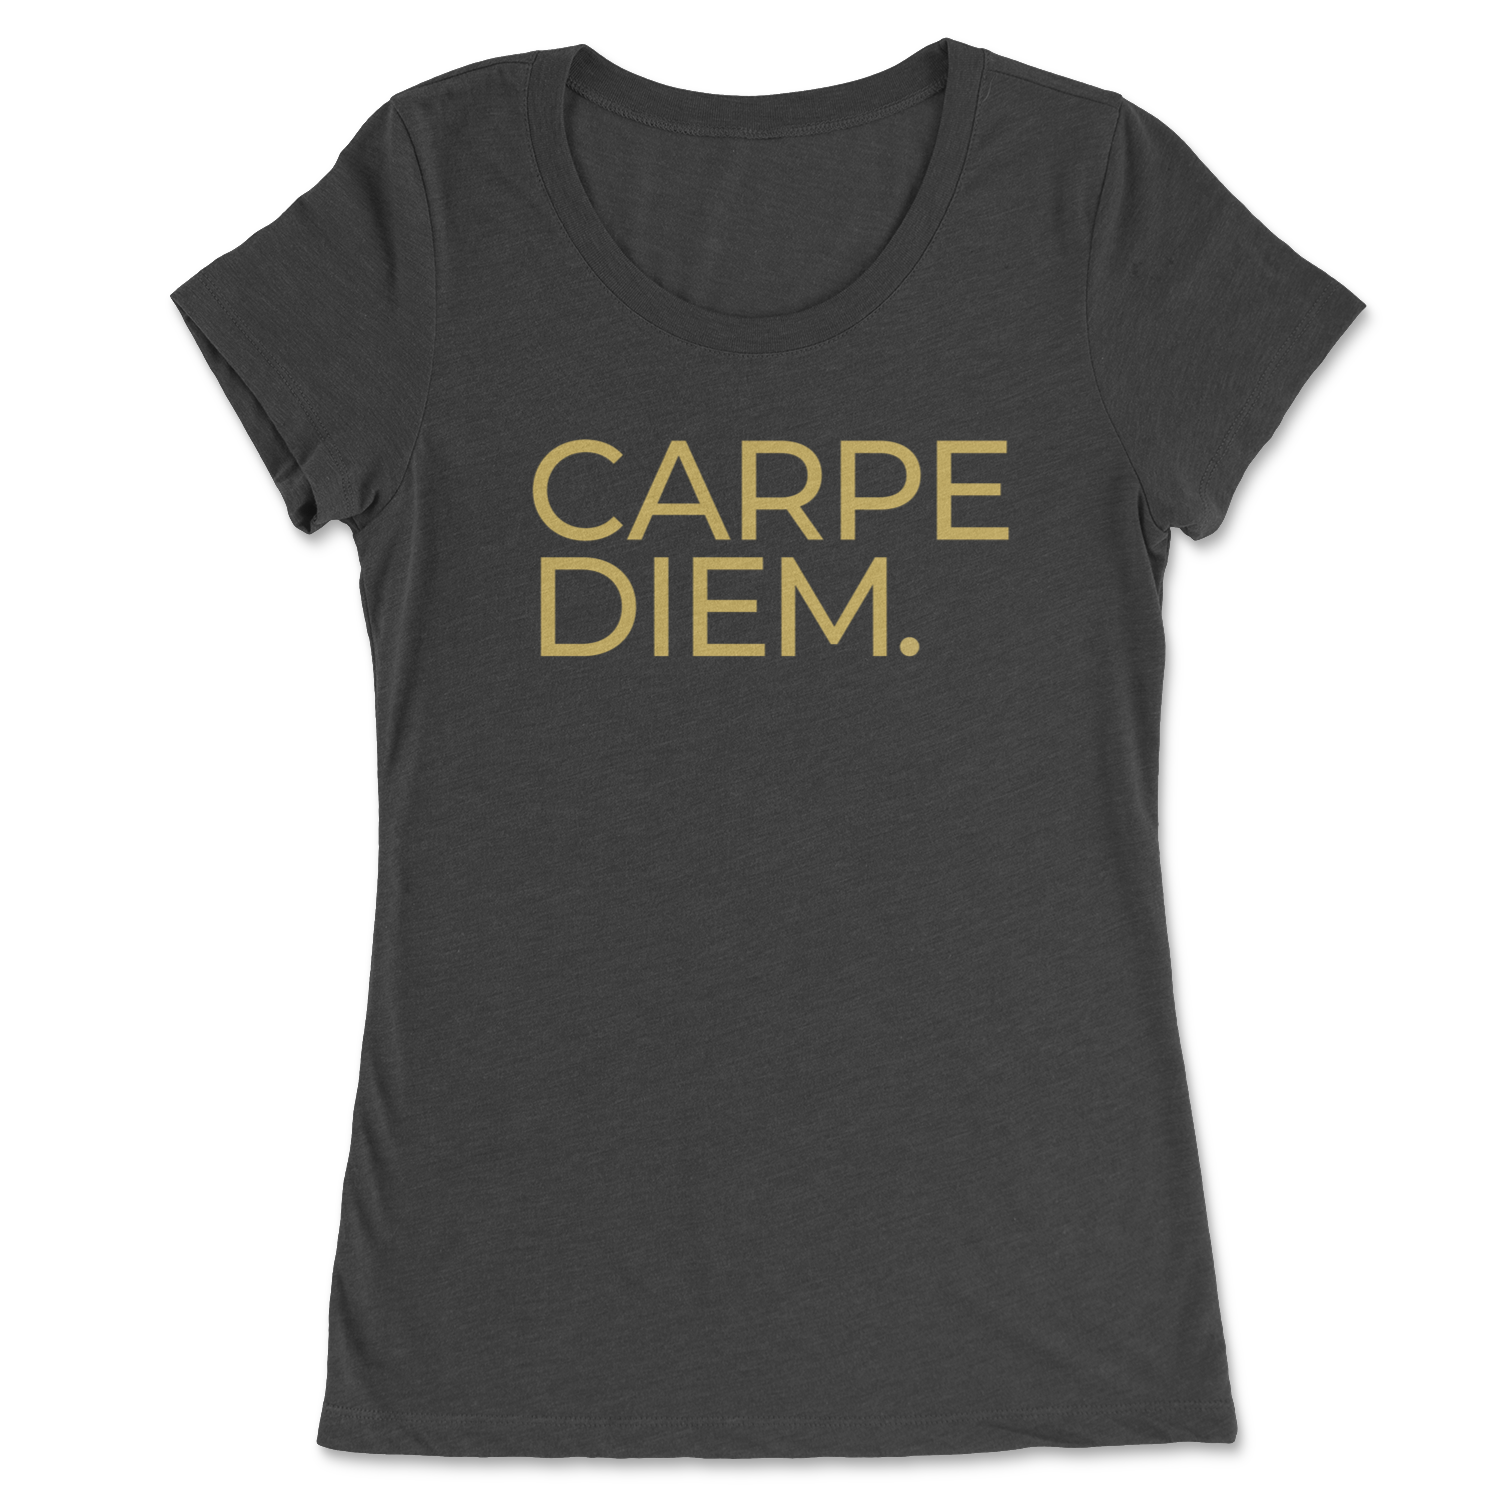 Charcoal black short-sleeved t-shirt with the words Carpe Diem printed in gold uppercase lettering.